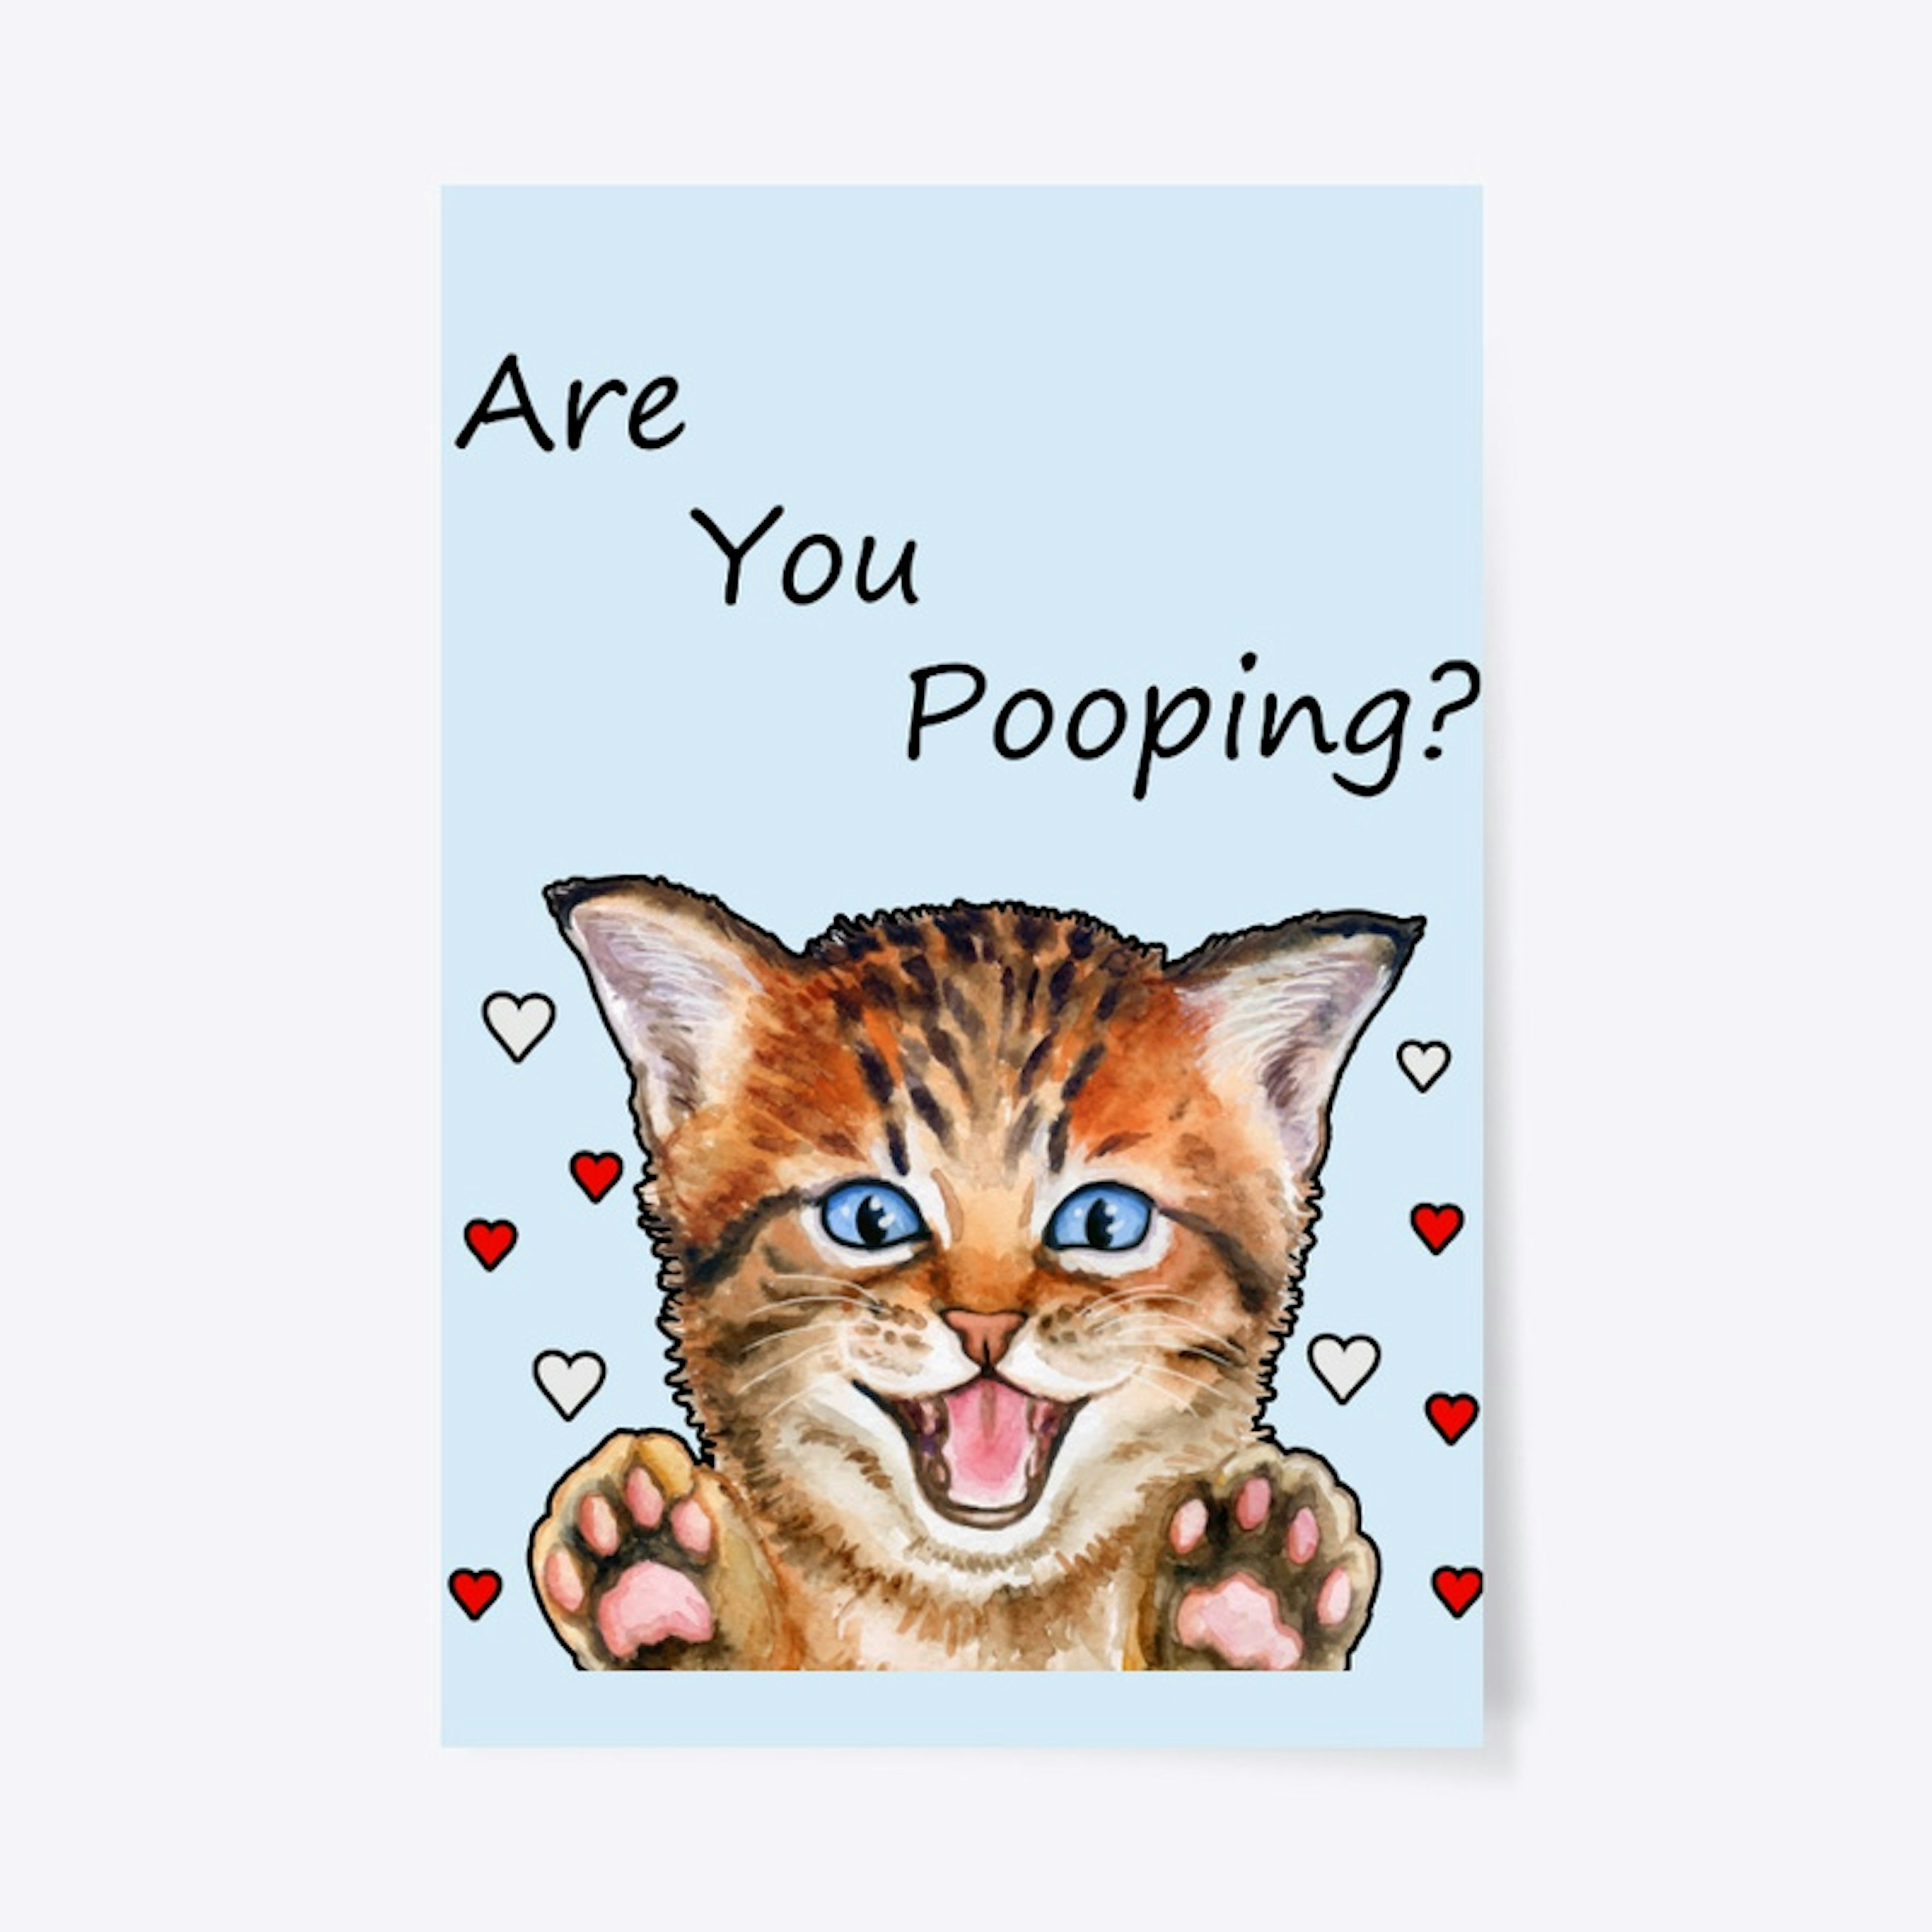 Are You Pooping?